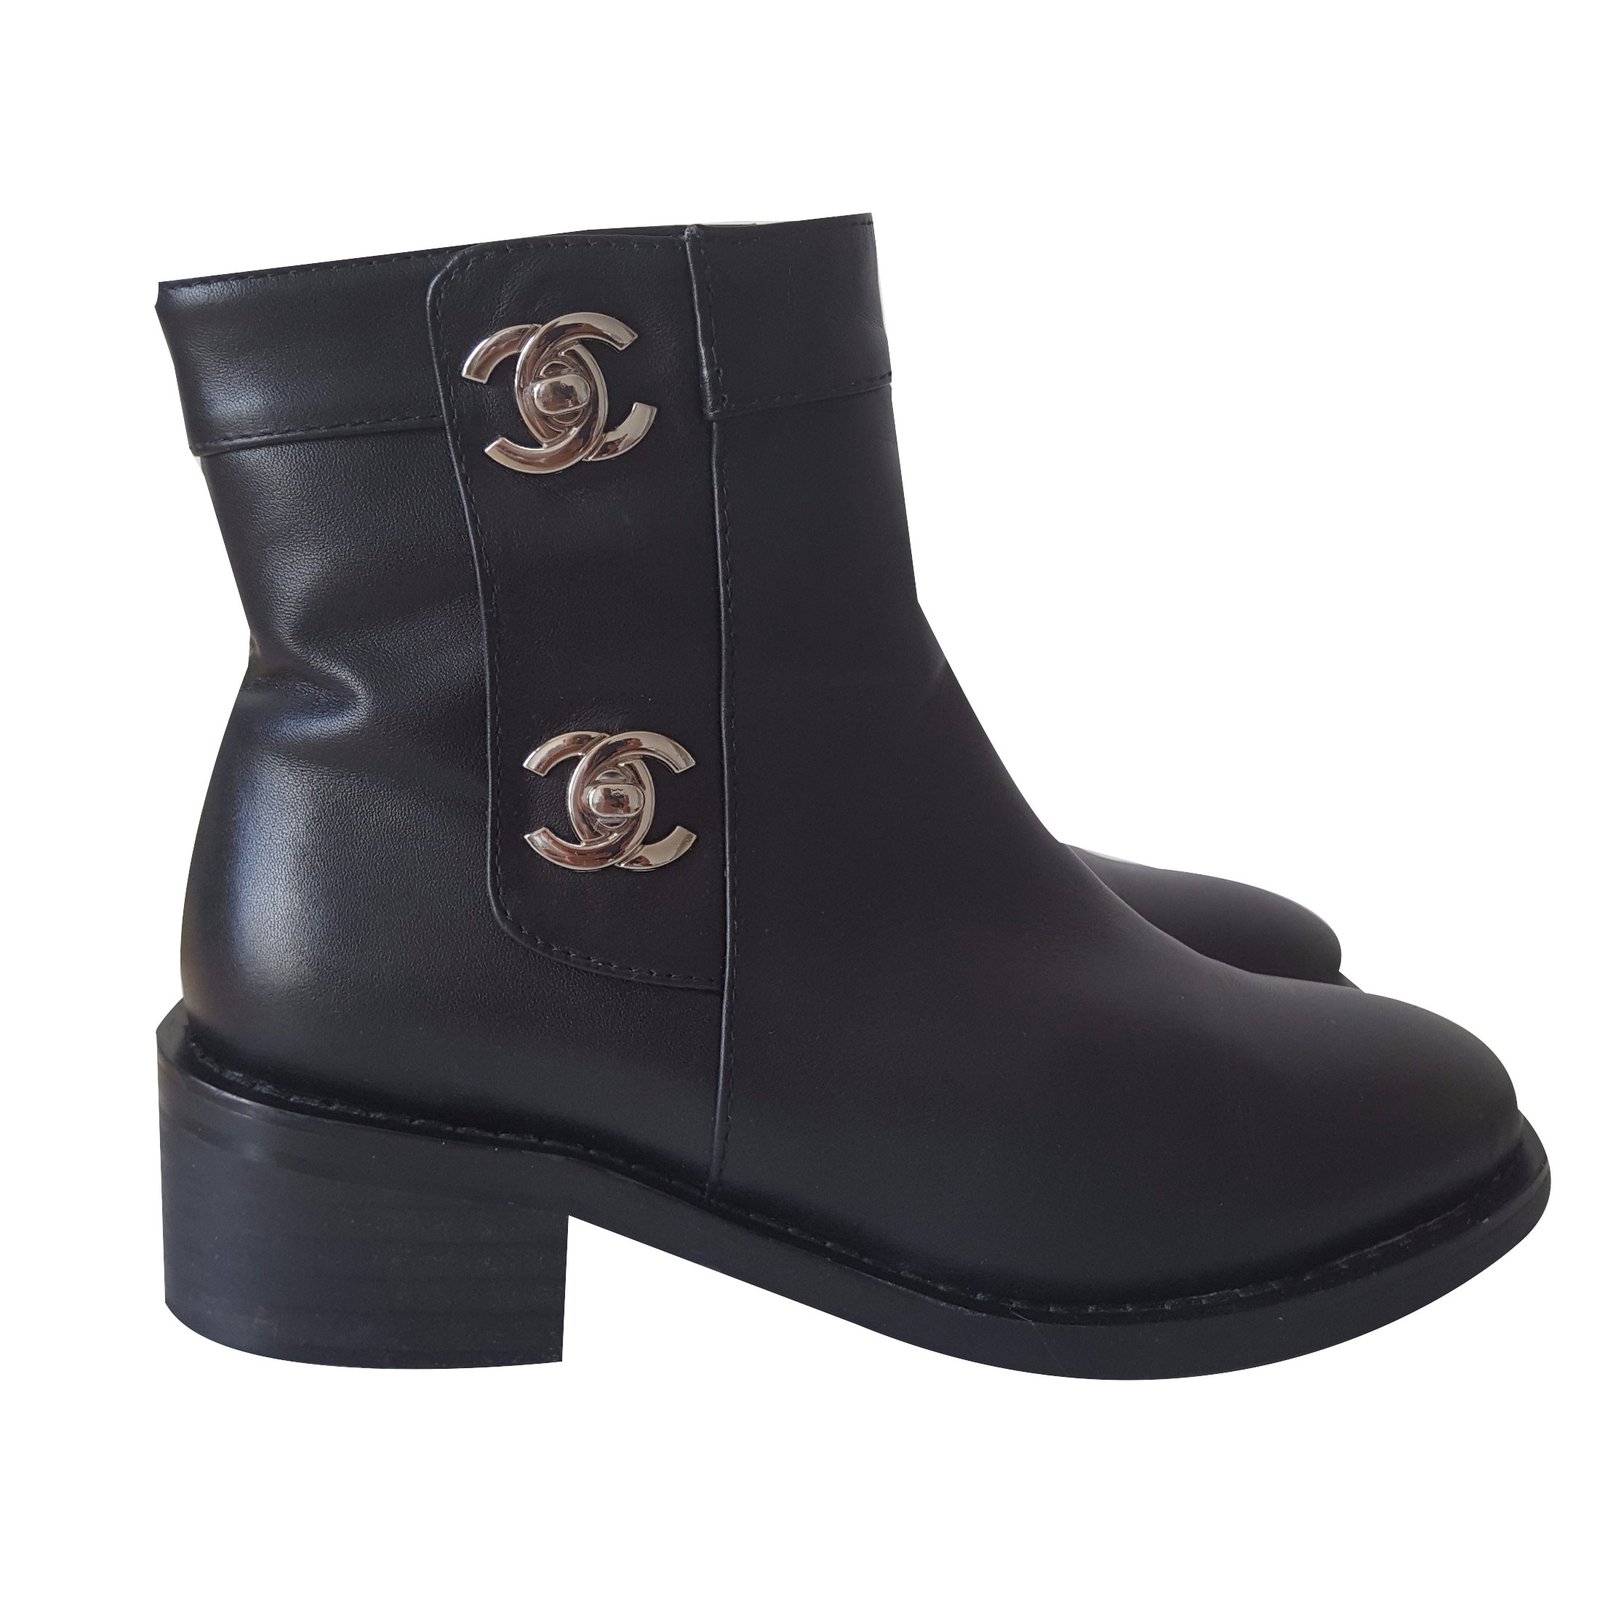 chanel black leather ankle boots